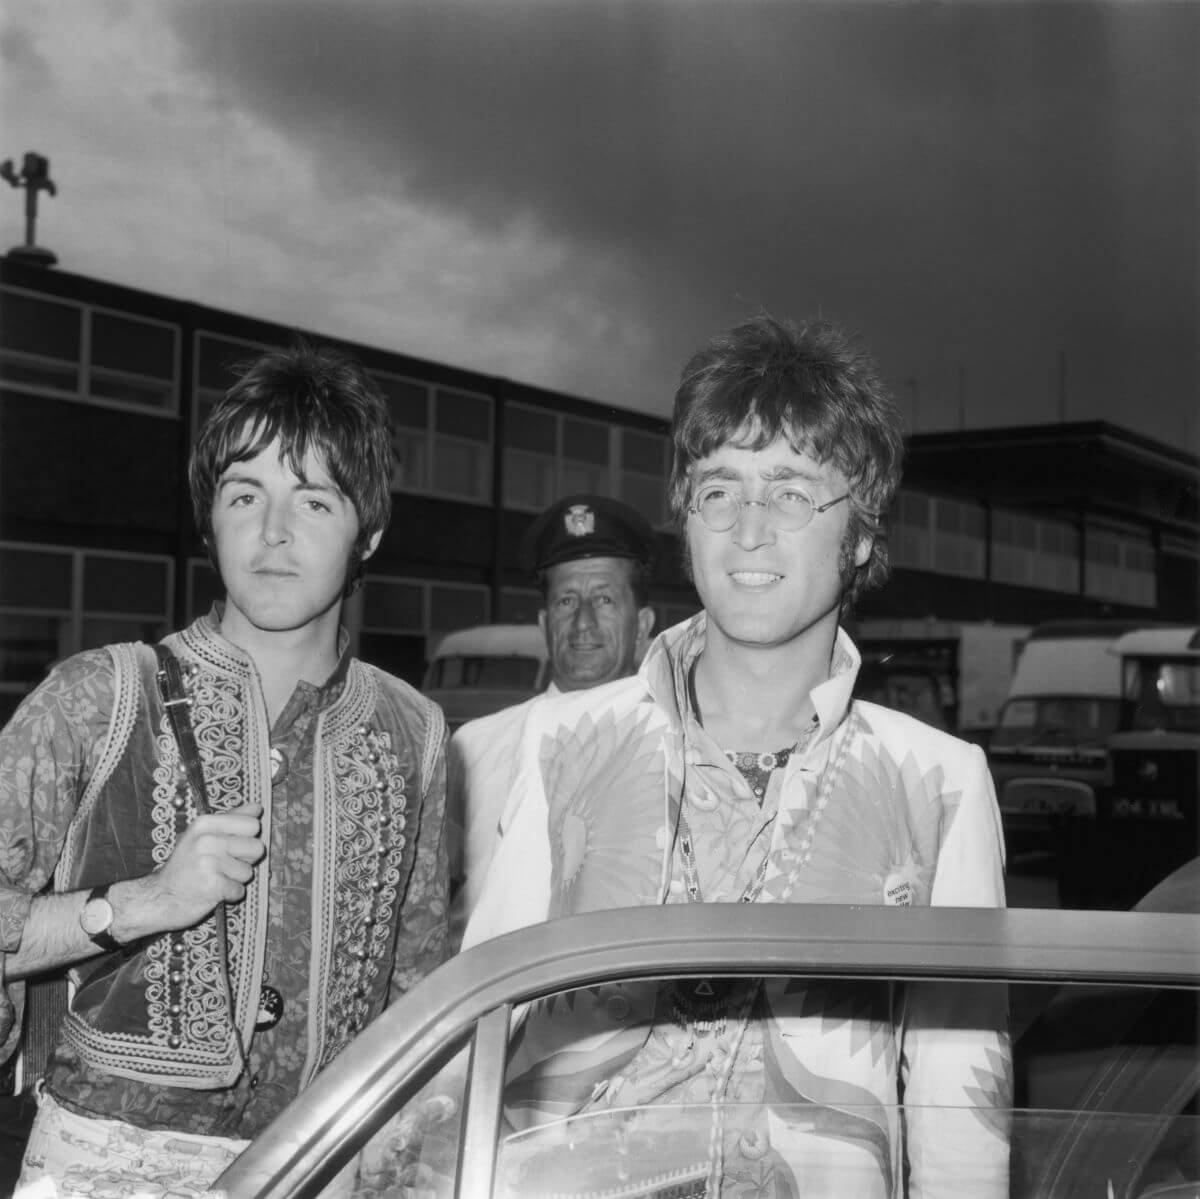 A black and white picture of Paul McCartney and John Lennon standing behind an open car door. A man stands behind them.